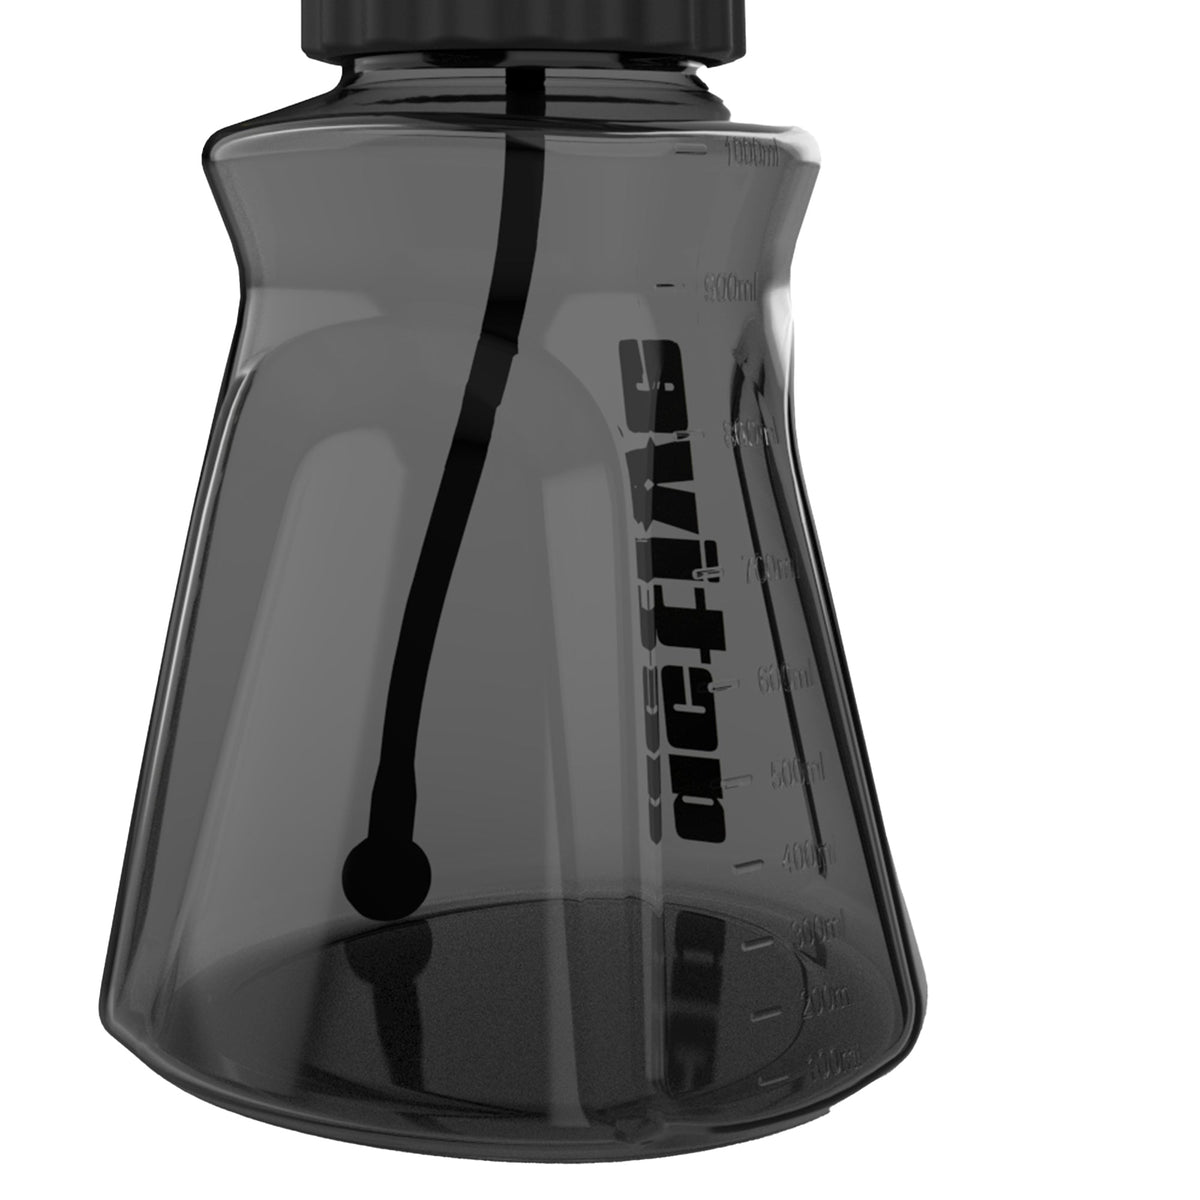 A transparent black glass coffee maker with a handle and volume measurement markings on the side, viewed from a slightly elevated angle, perfect for automotive detailing.